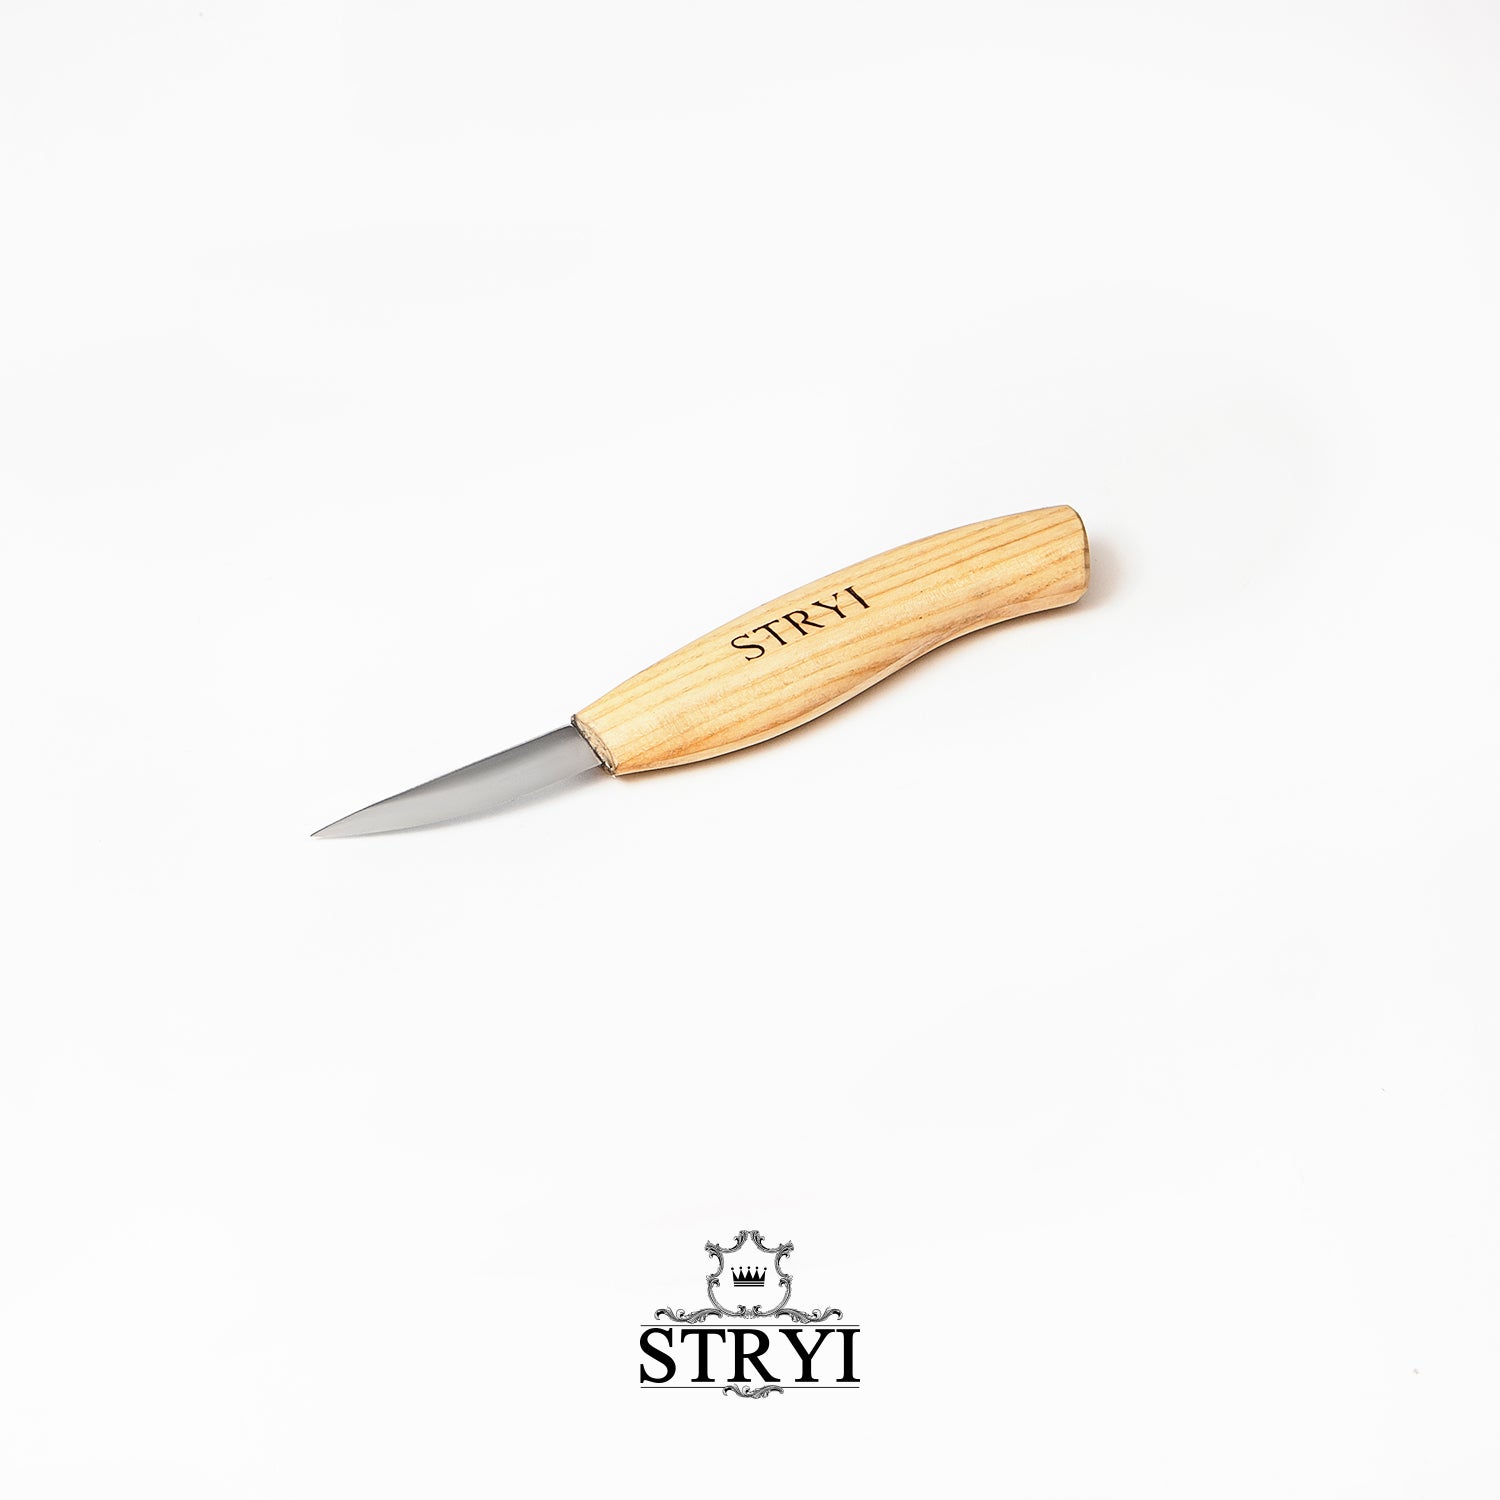 Whittling knife for wood carving 58mm STRYI Profi, sloyd knife, making –  Wood carving tools STRYI